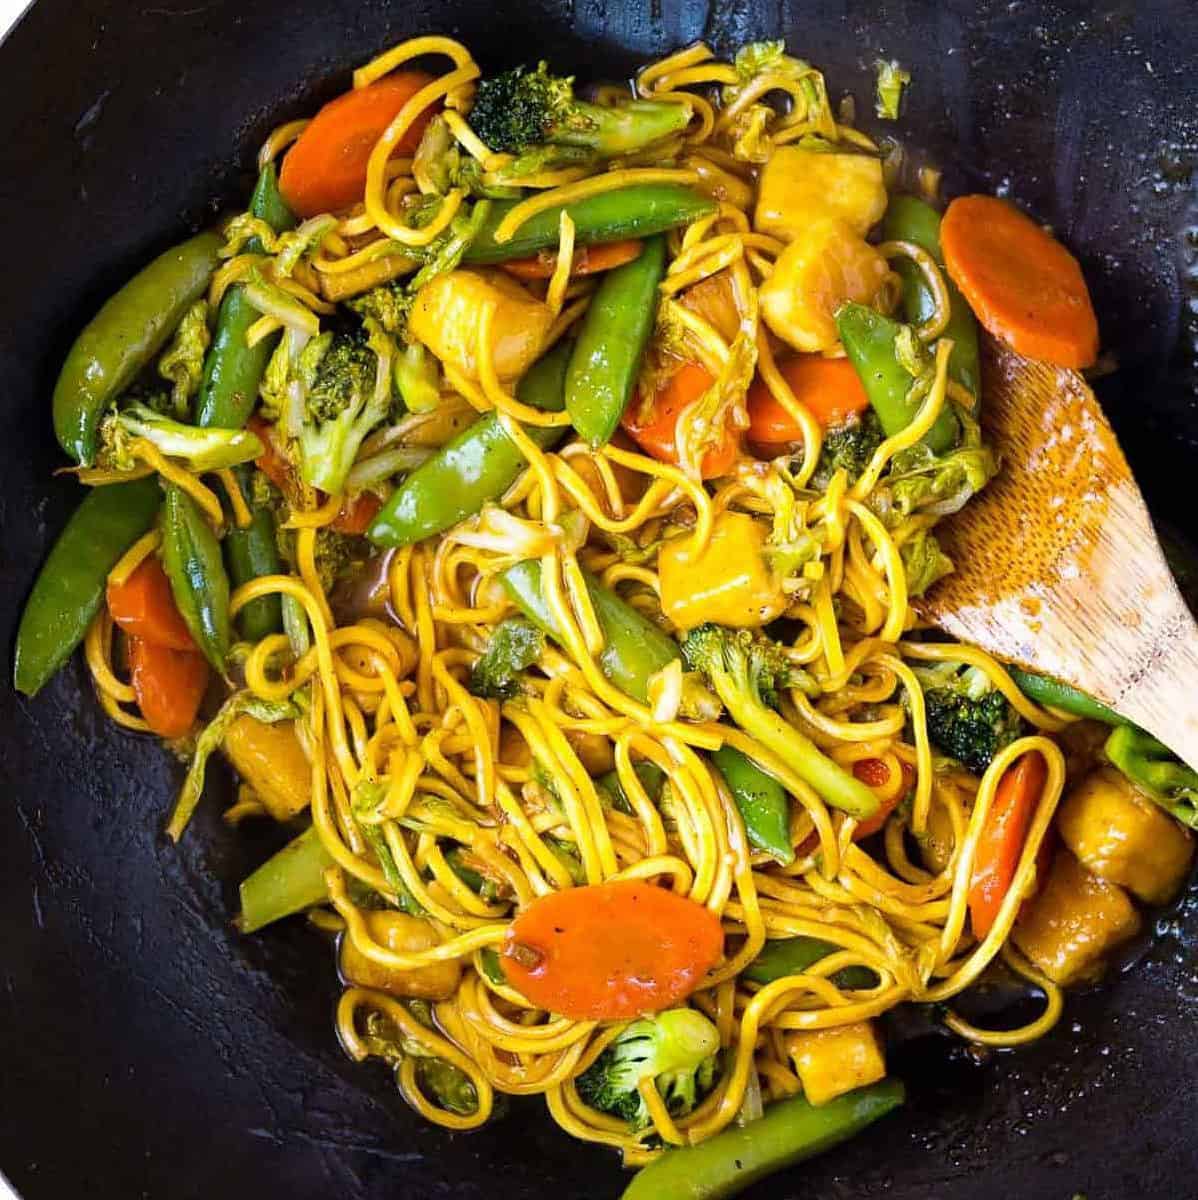  Hearty and wholesome, these vegetarian pansit noodles are packed with nutritious ingredients.